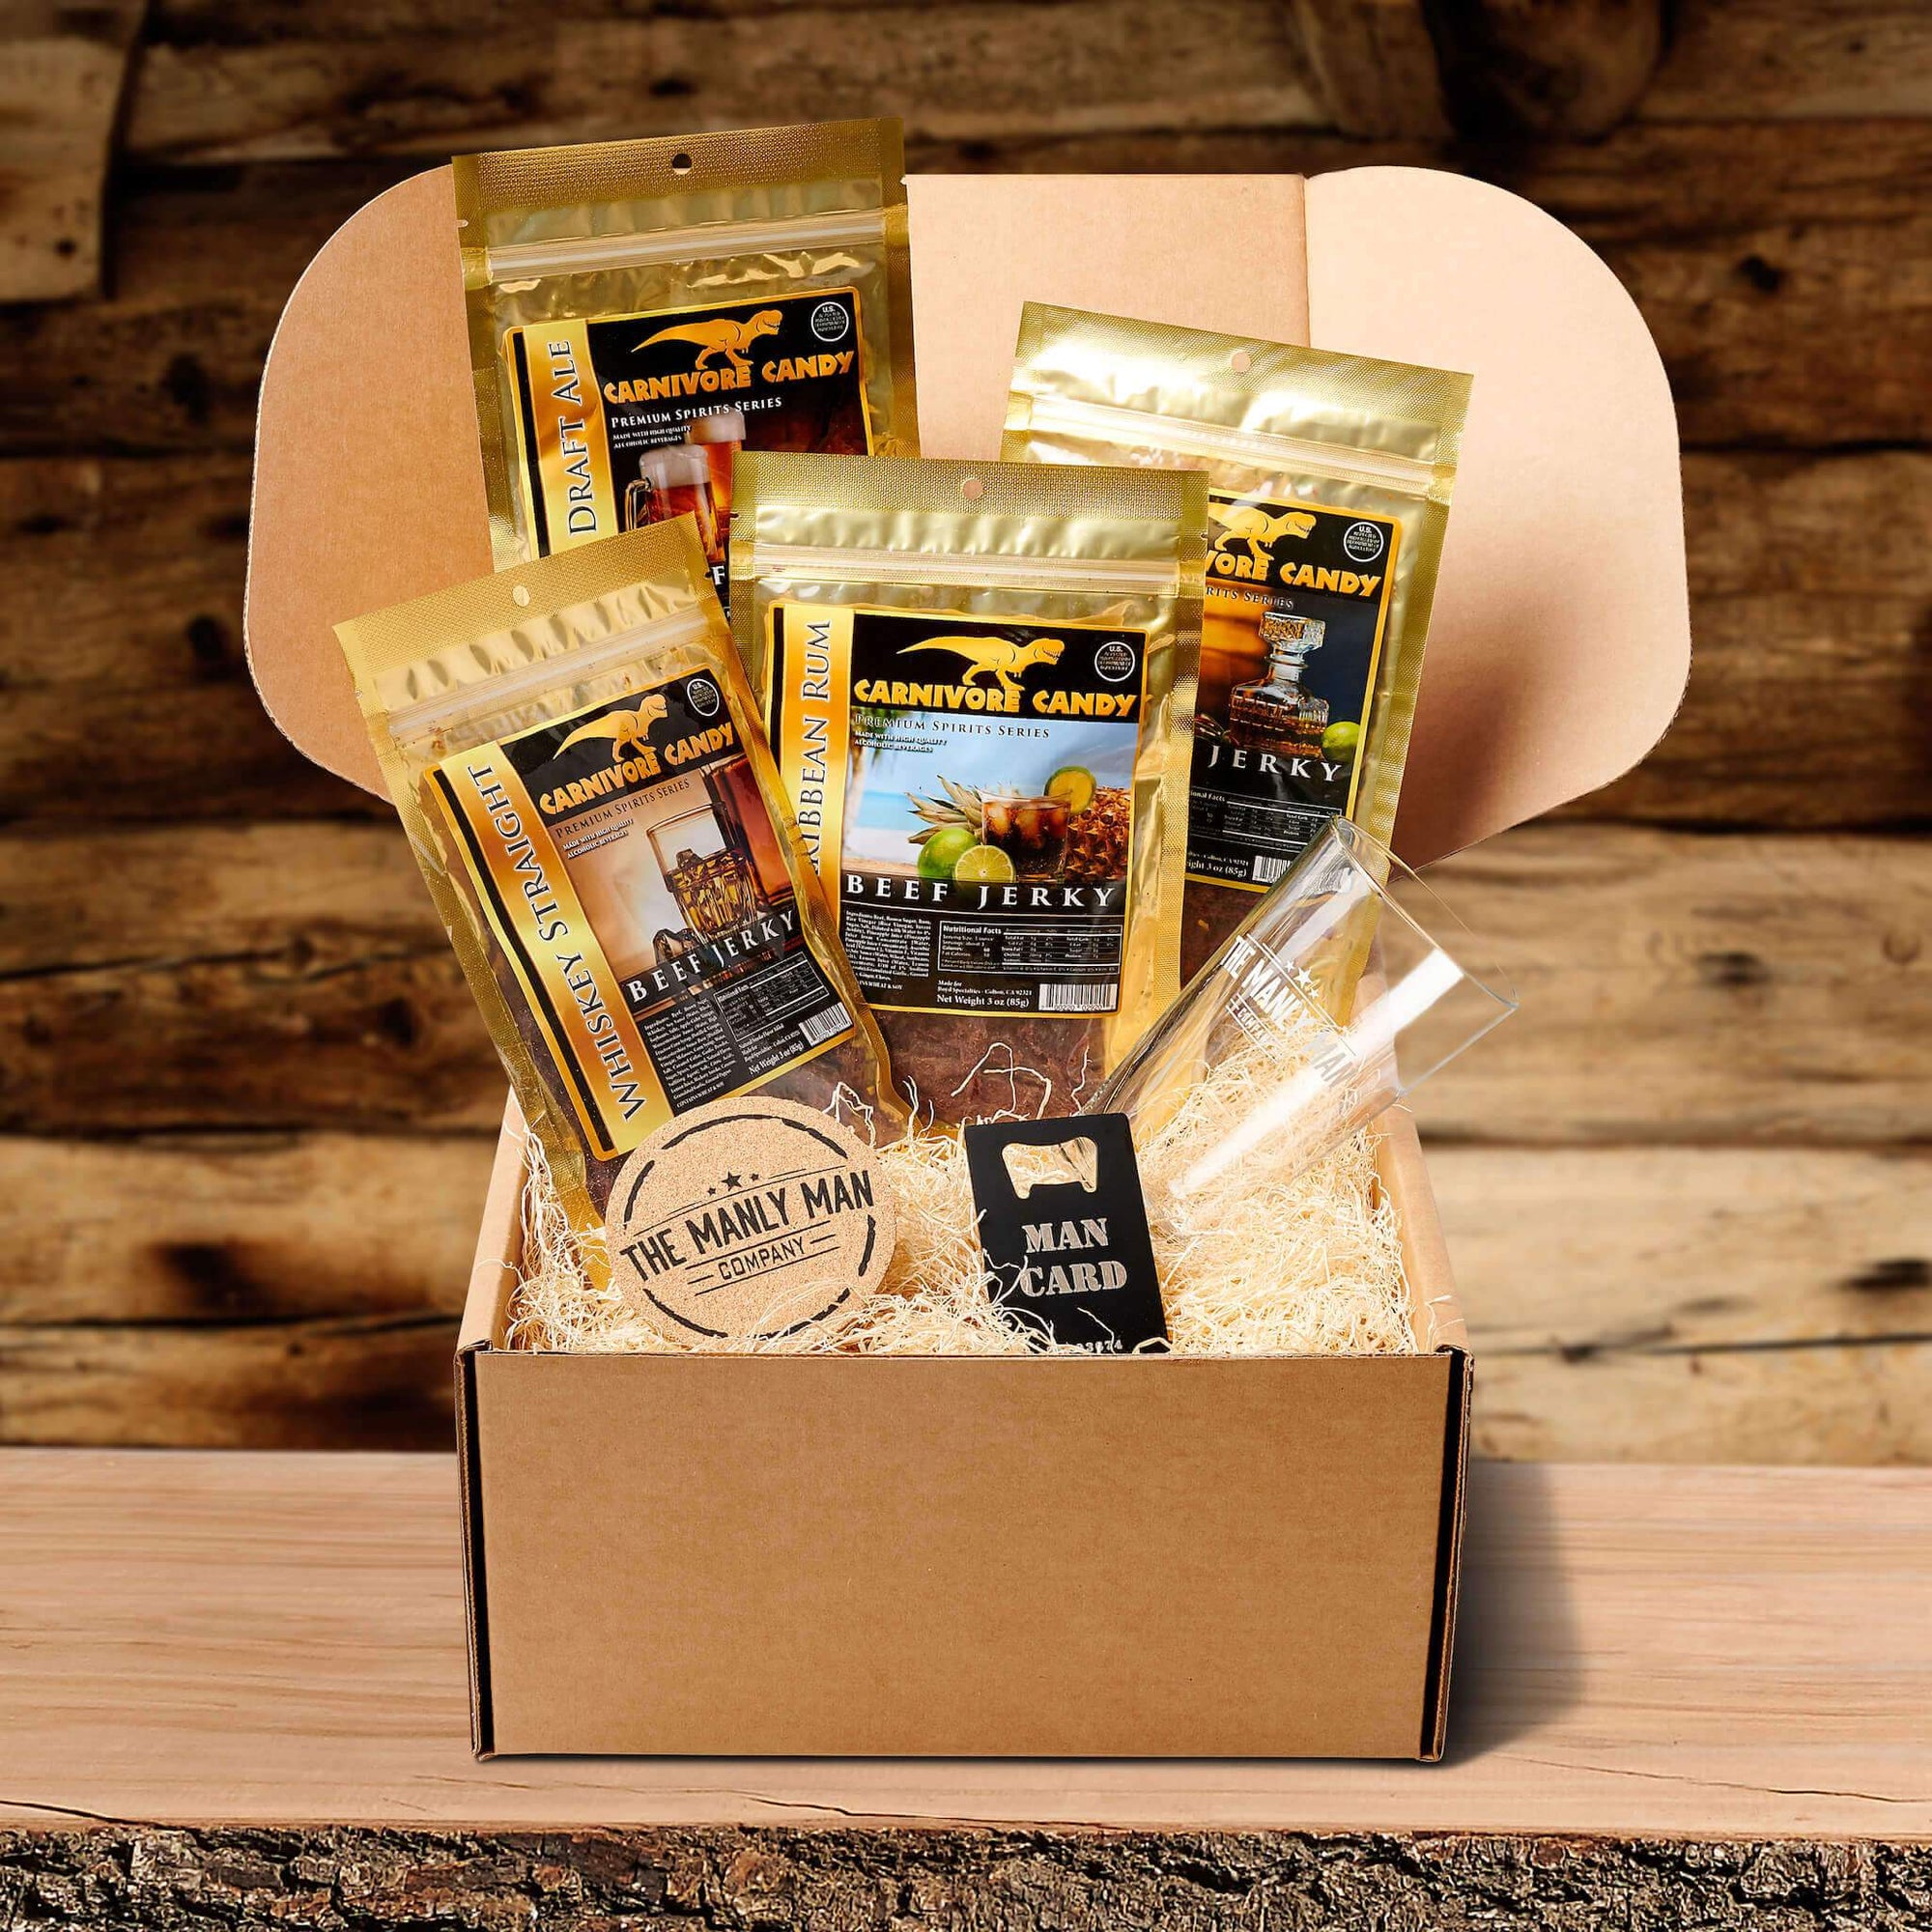 Manly snack gift box in front of outdoors-themed background